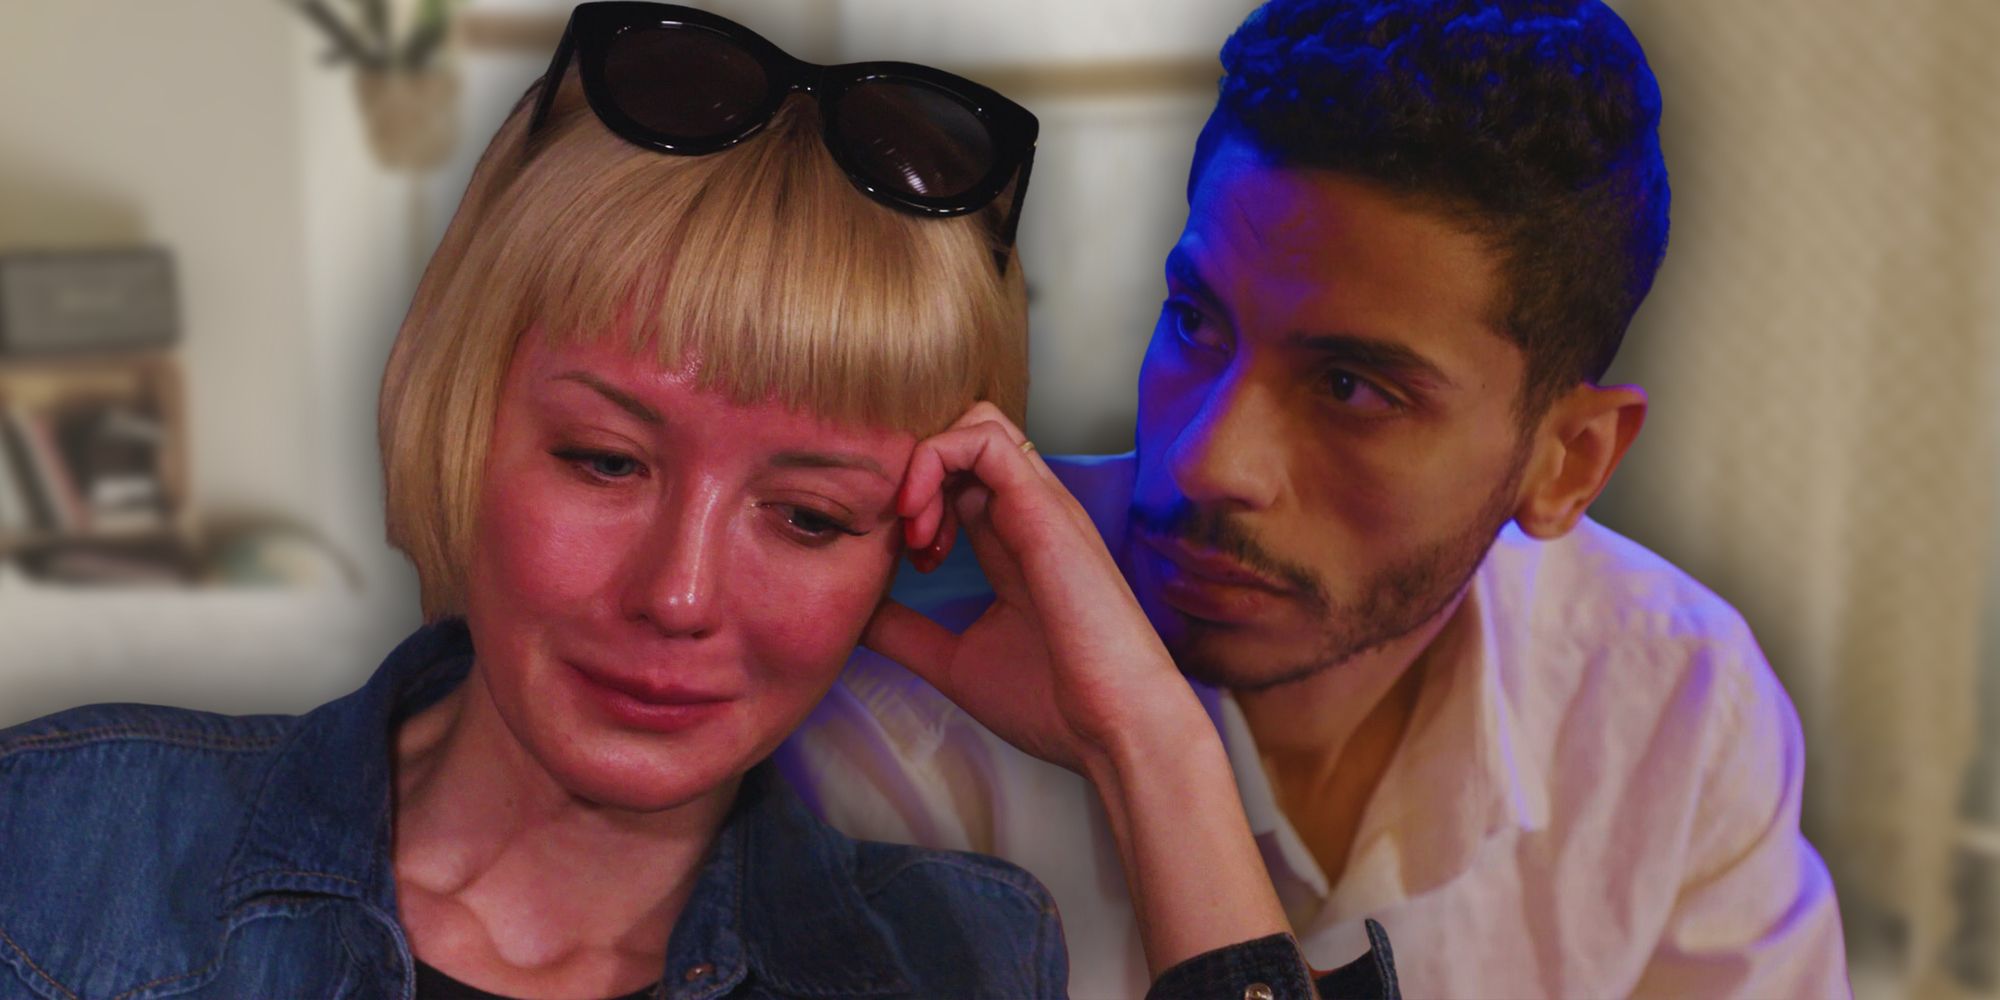  Nicole Sherbiny and Mahmoud Elsherbiny from 90 Day Fiance montage serious expressions